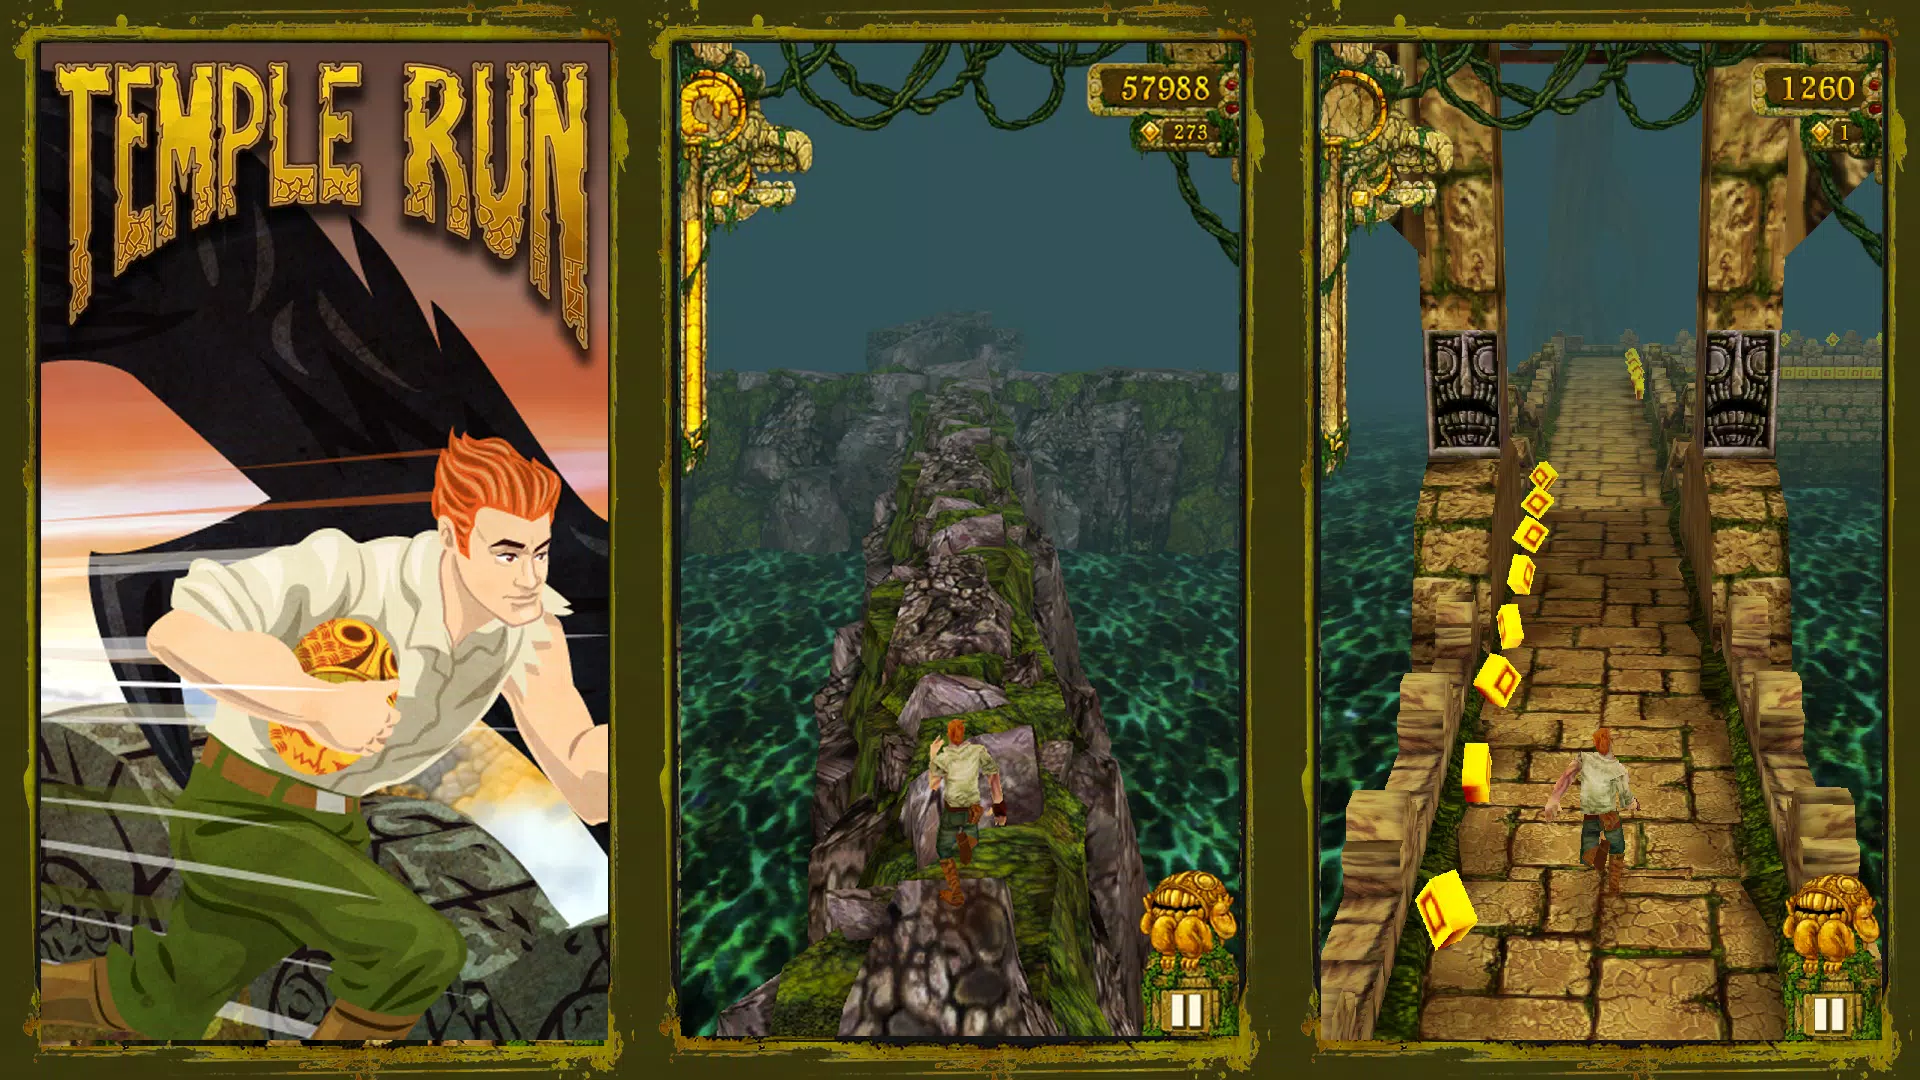 Temple Run Online Game - Play Temple Run Online Online for Free at